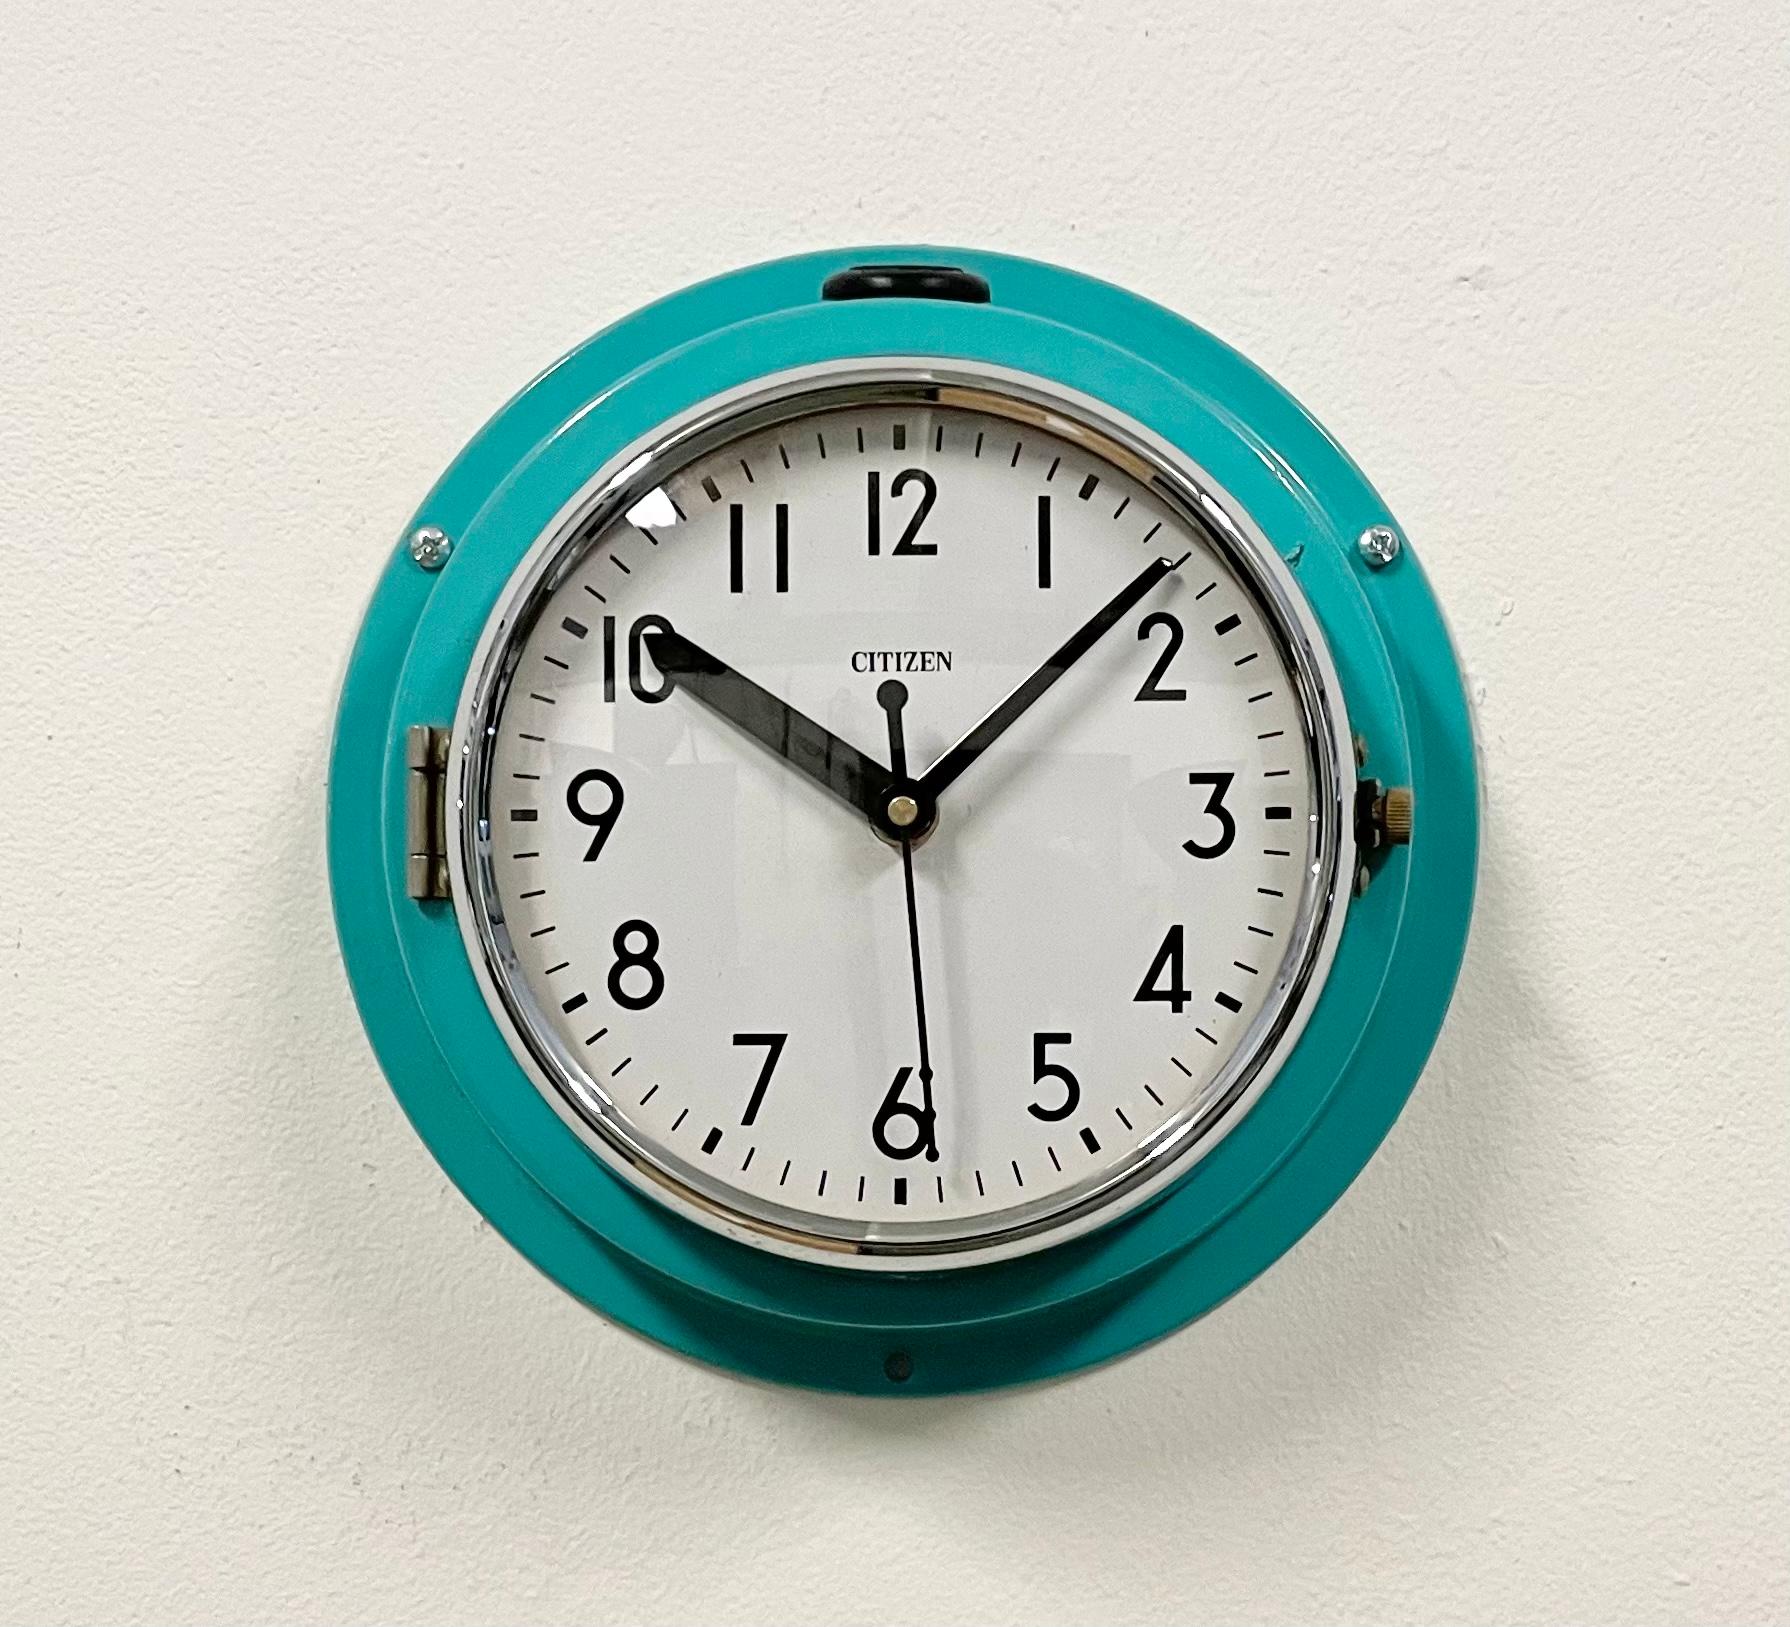 Vintage Citizen navy slave clock designed during the 1970s and produced till 1990s. These clocks were used on large Japanese tankers and cargo ships. It features a turquoise metal frame, a plastic dial and curved clear glass cover. This item has